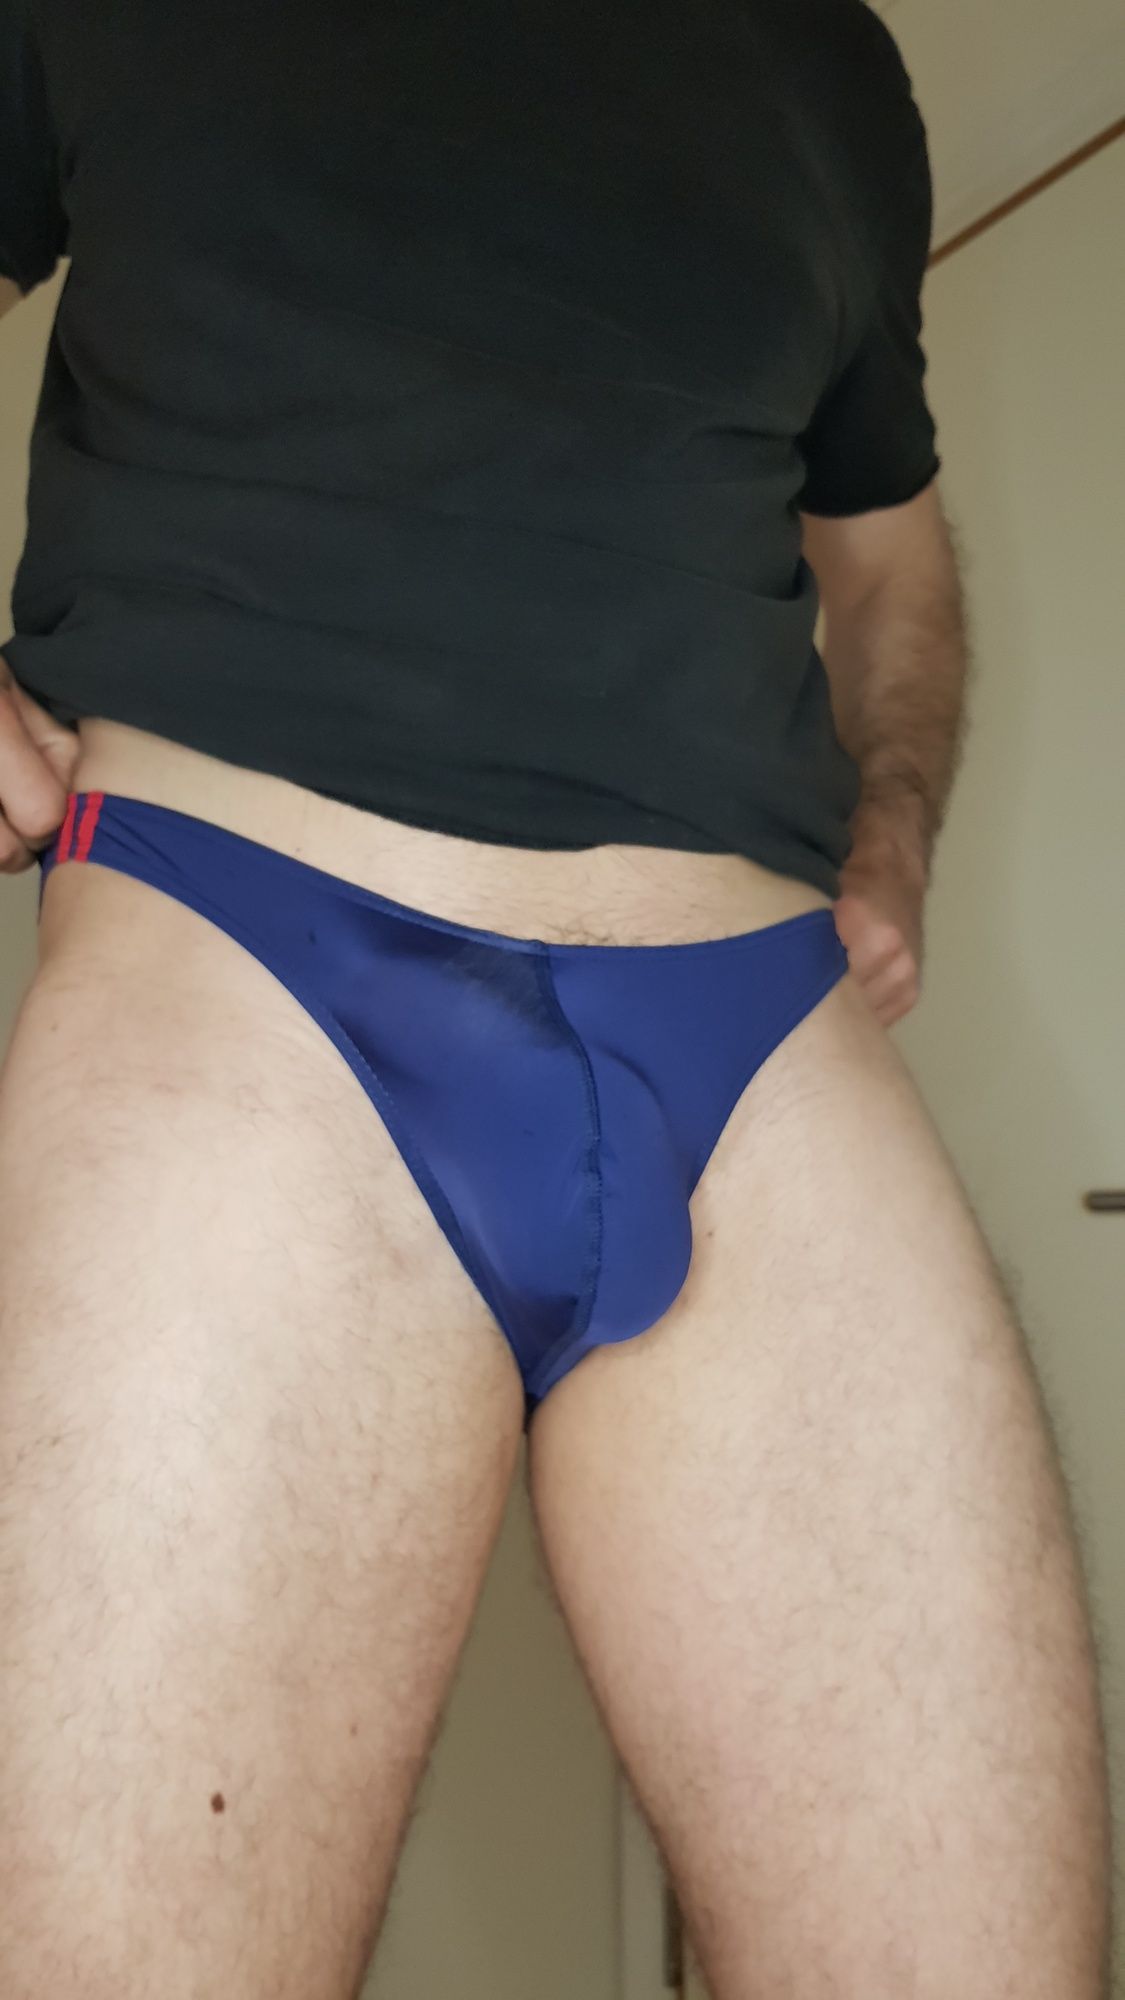 Should i go to pool in this speedos?